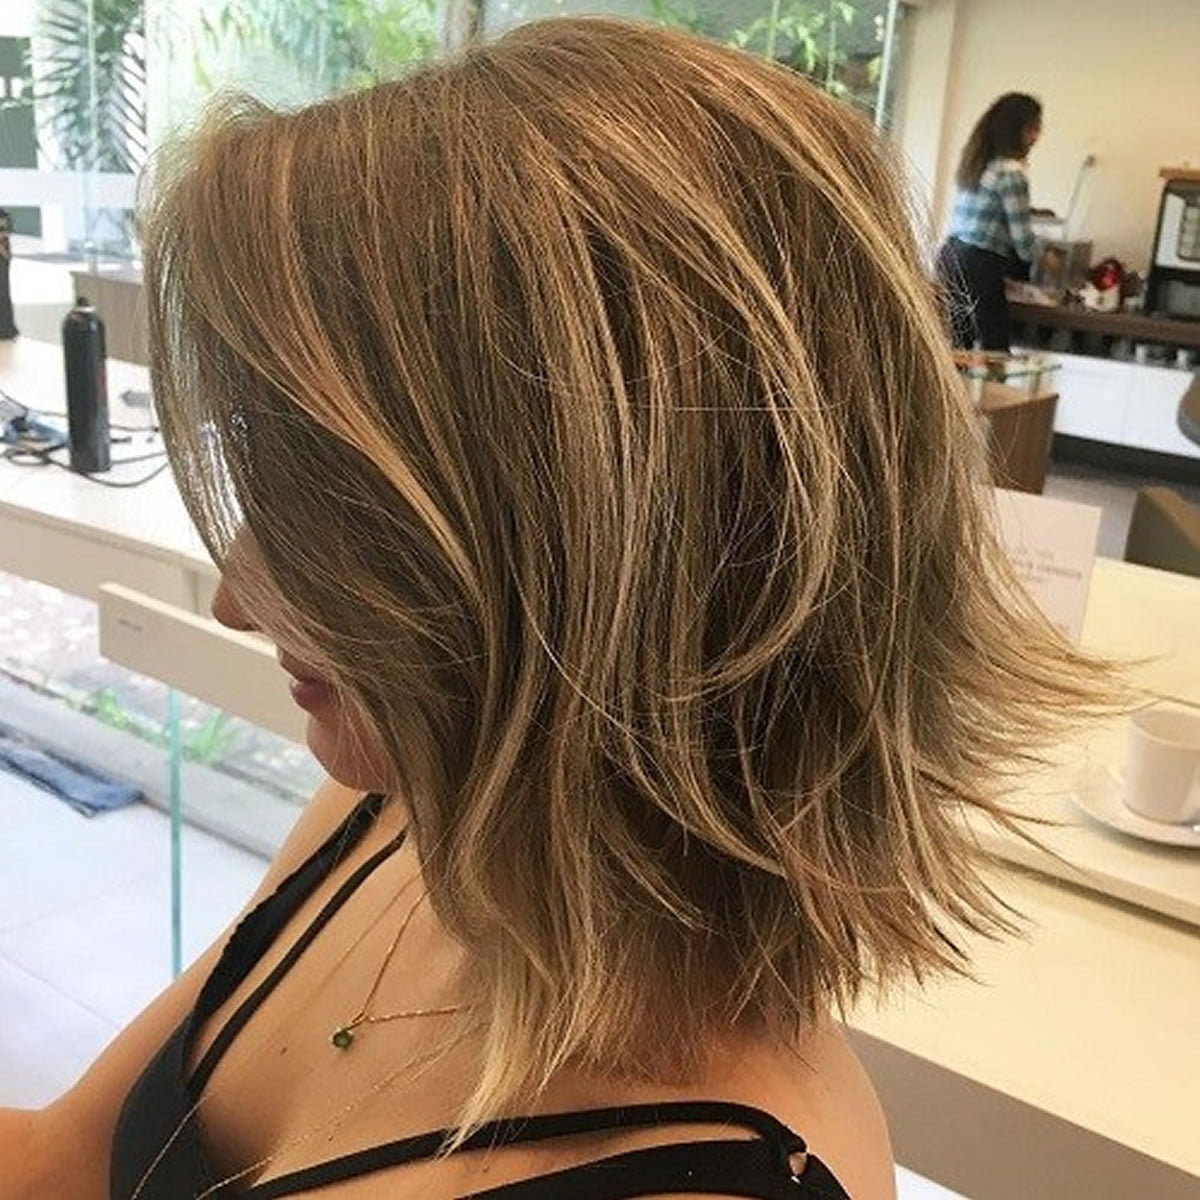 Long Bob Haircuts Ideas That Will Bring Beauty To Your Beauty Hairstyles